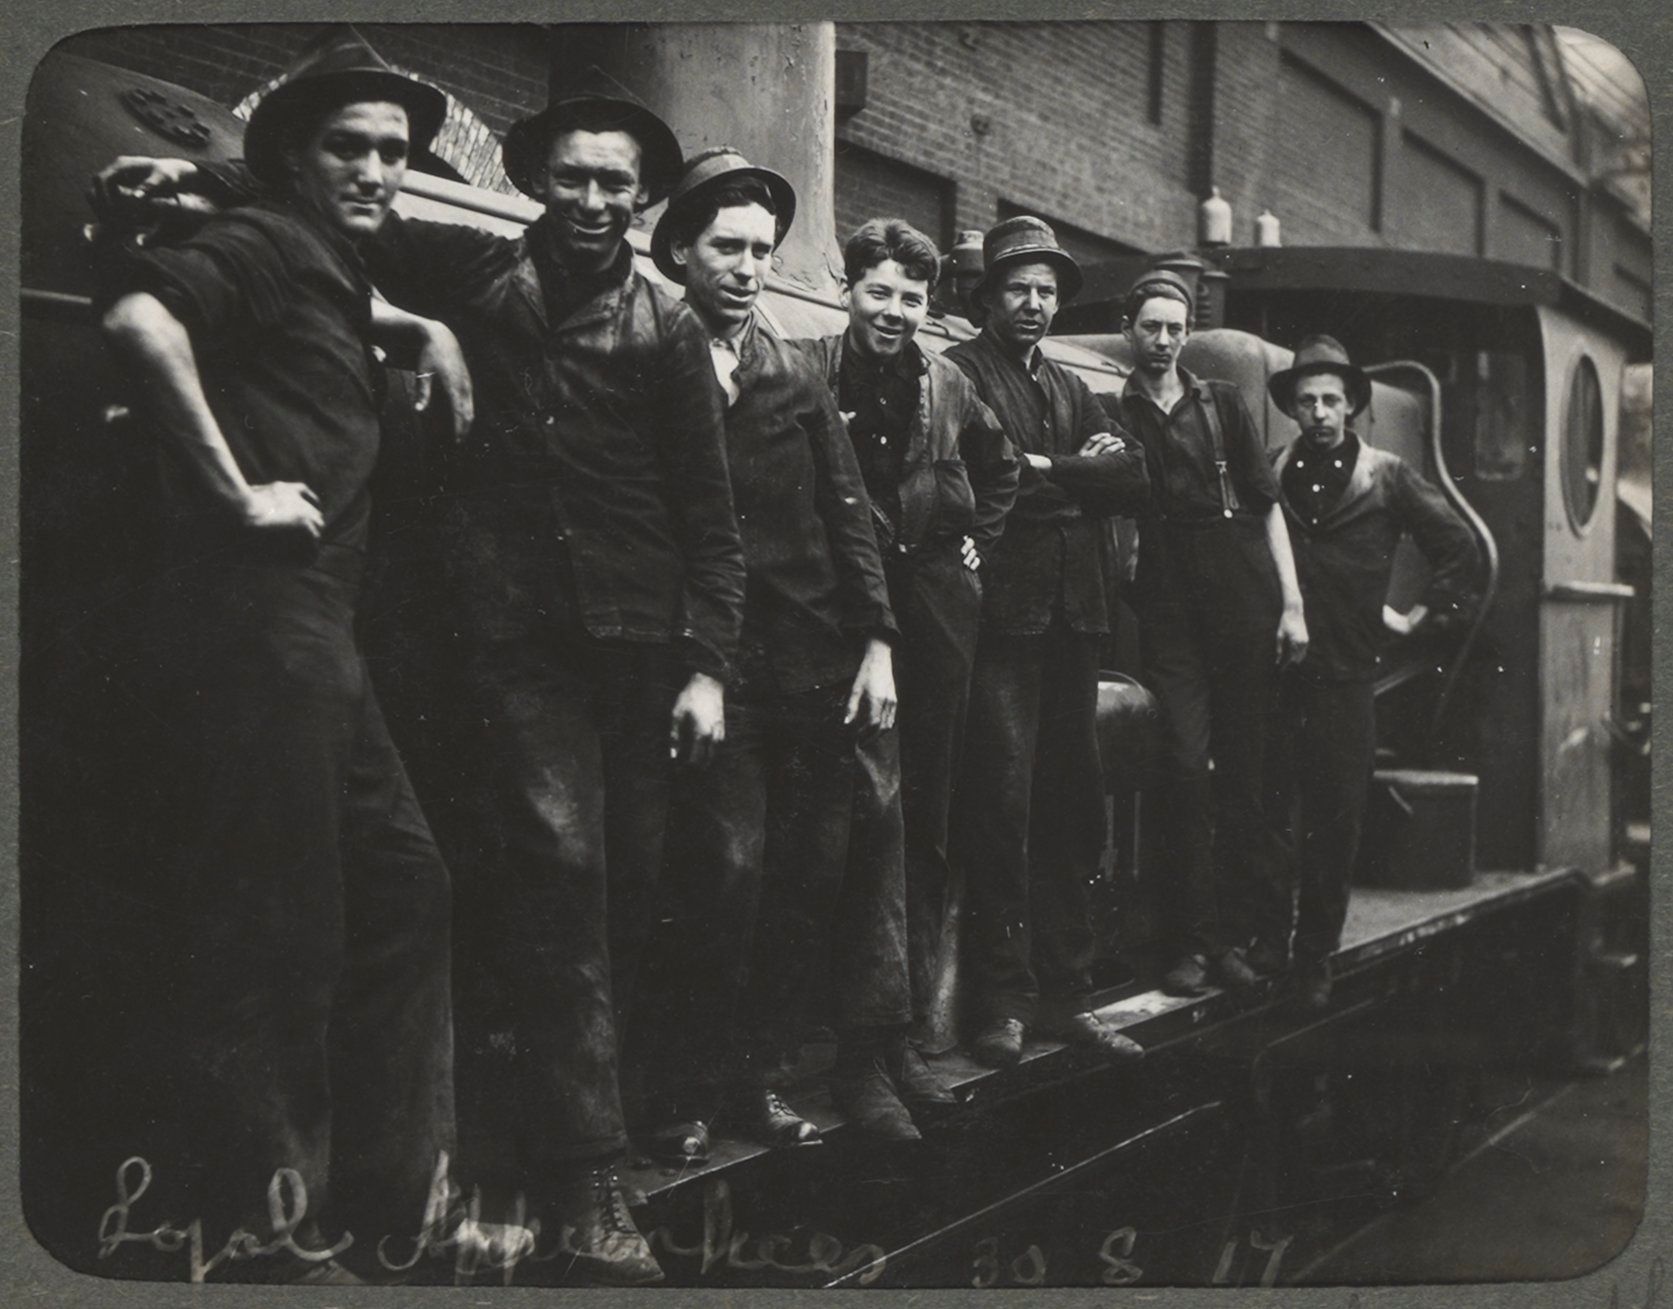 Men stand in a line on the side of a locomotive engine